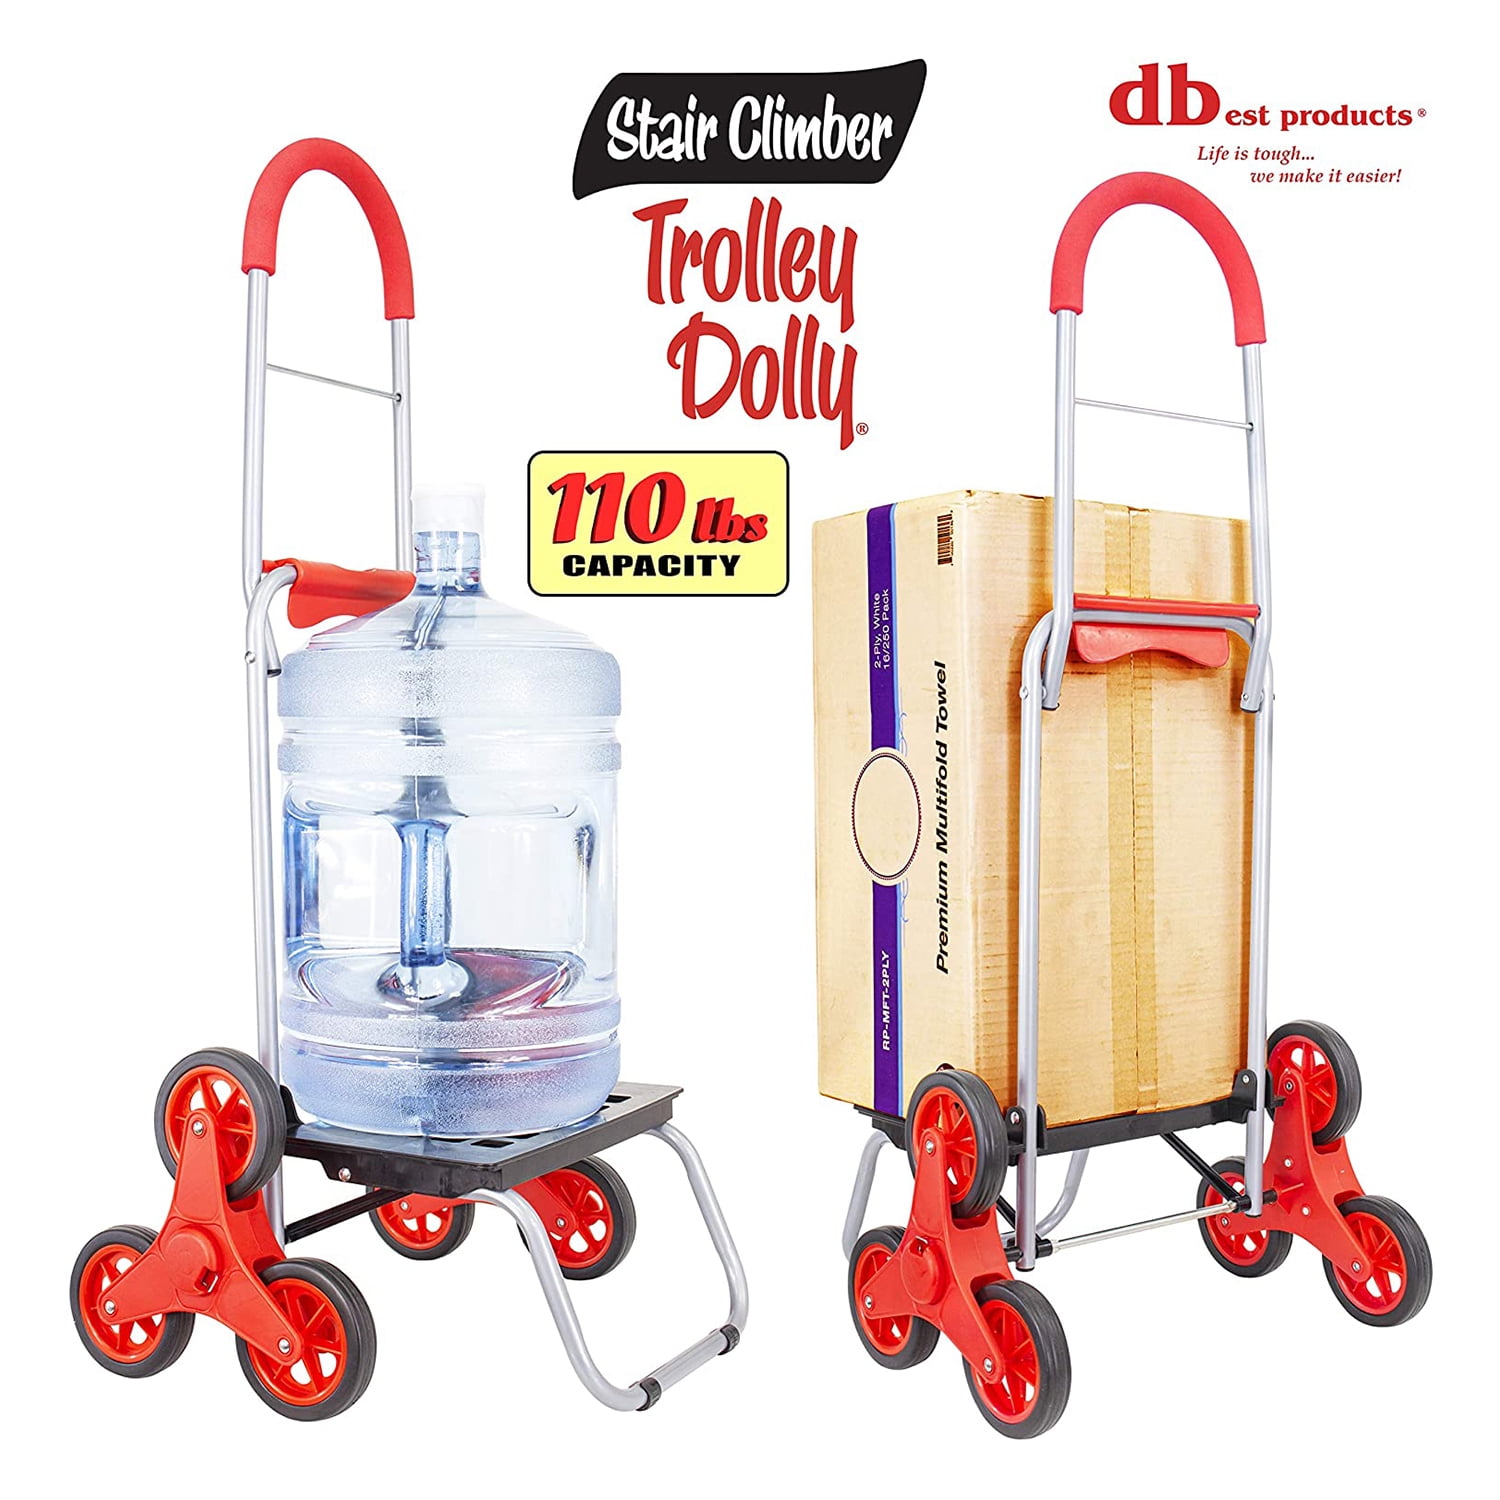 dbest products Stair Climber Bigger Trolley Dolly Shopping Cart Red Shopping Grocery Foldable Cart Condo Apartment 